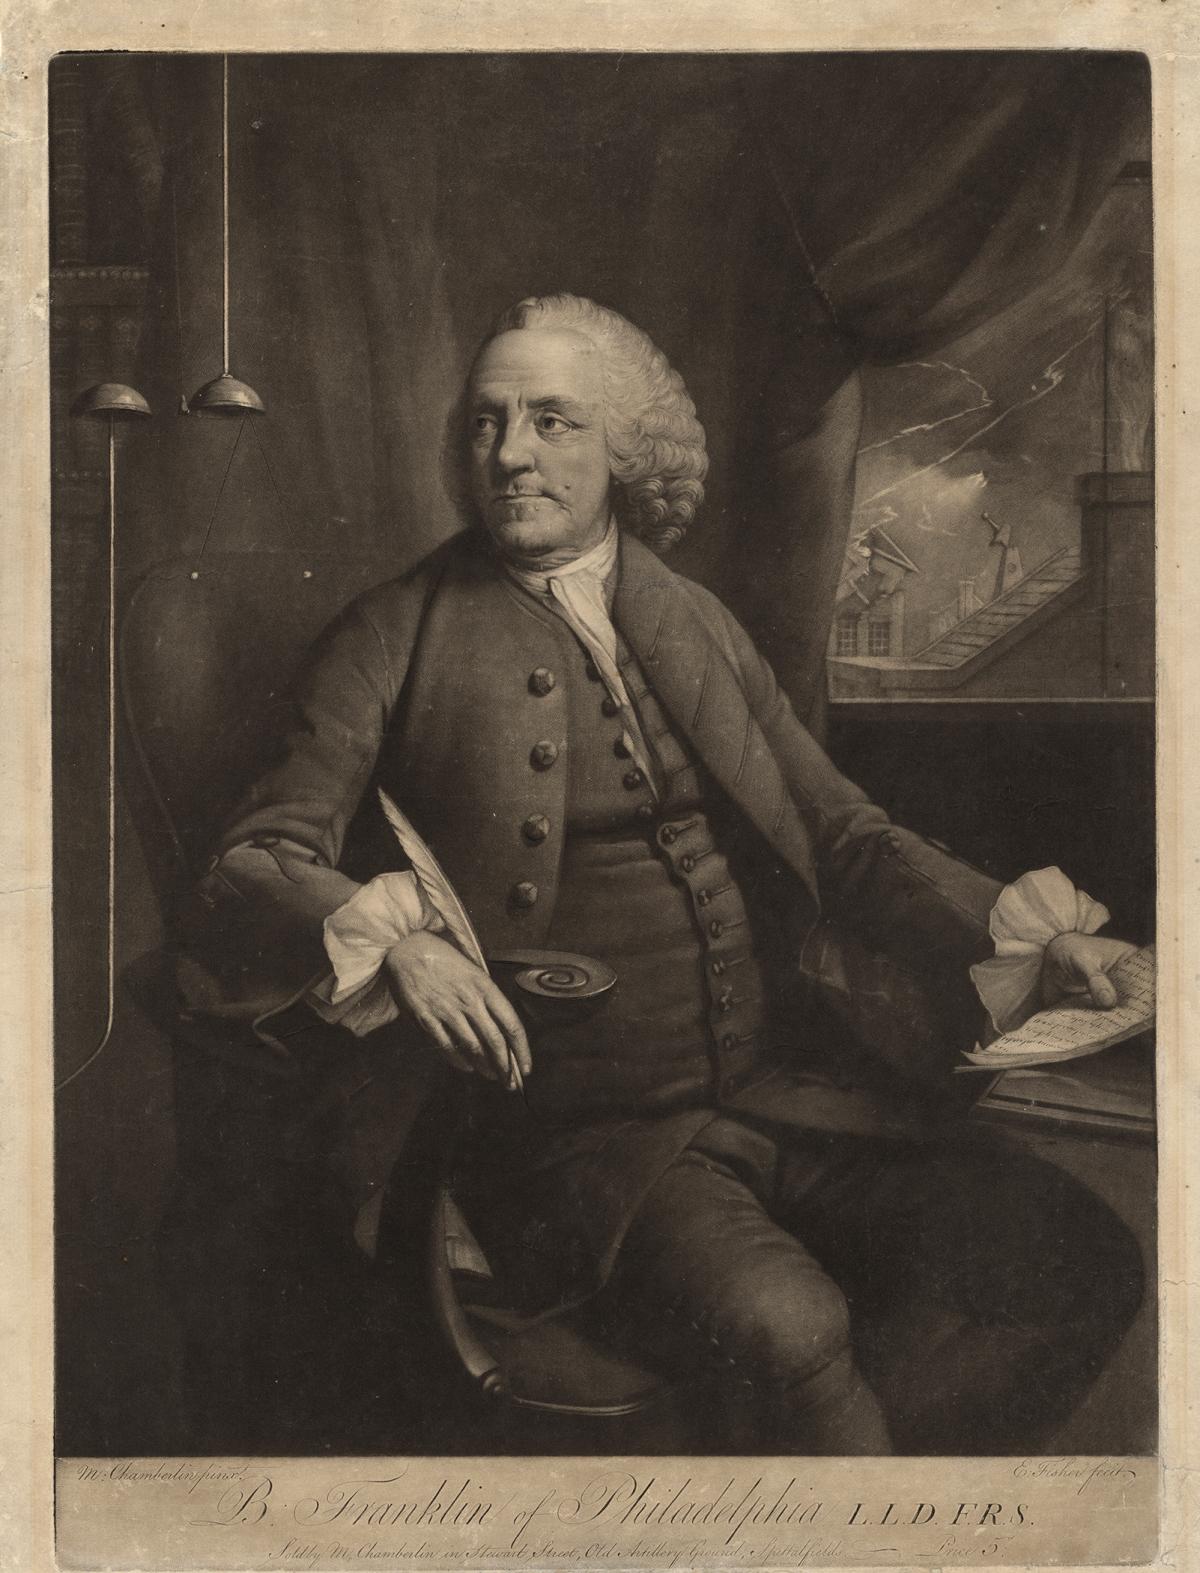 Black and white engraving of Ben Franklin